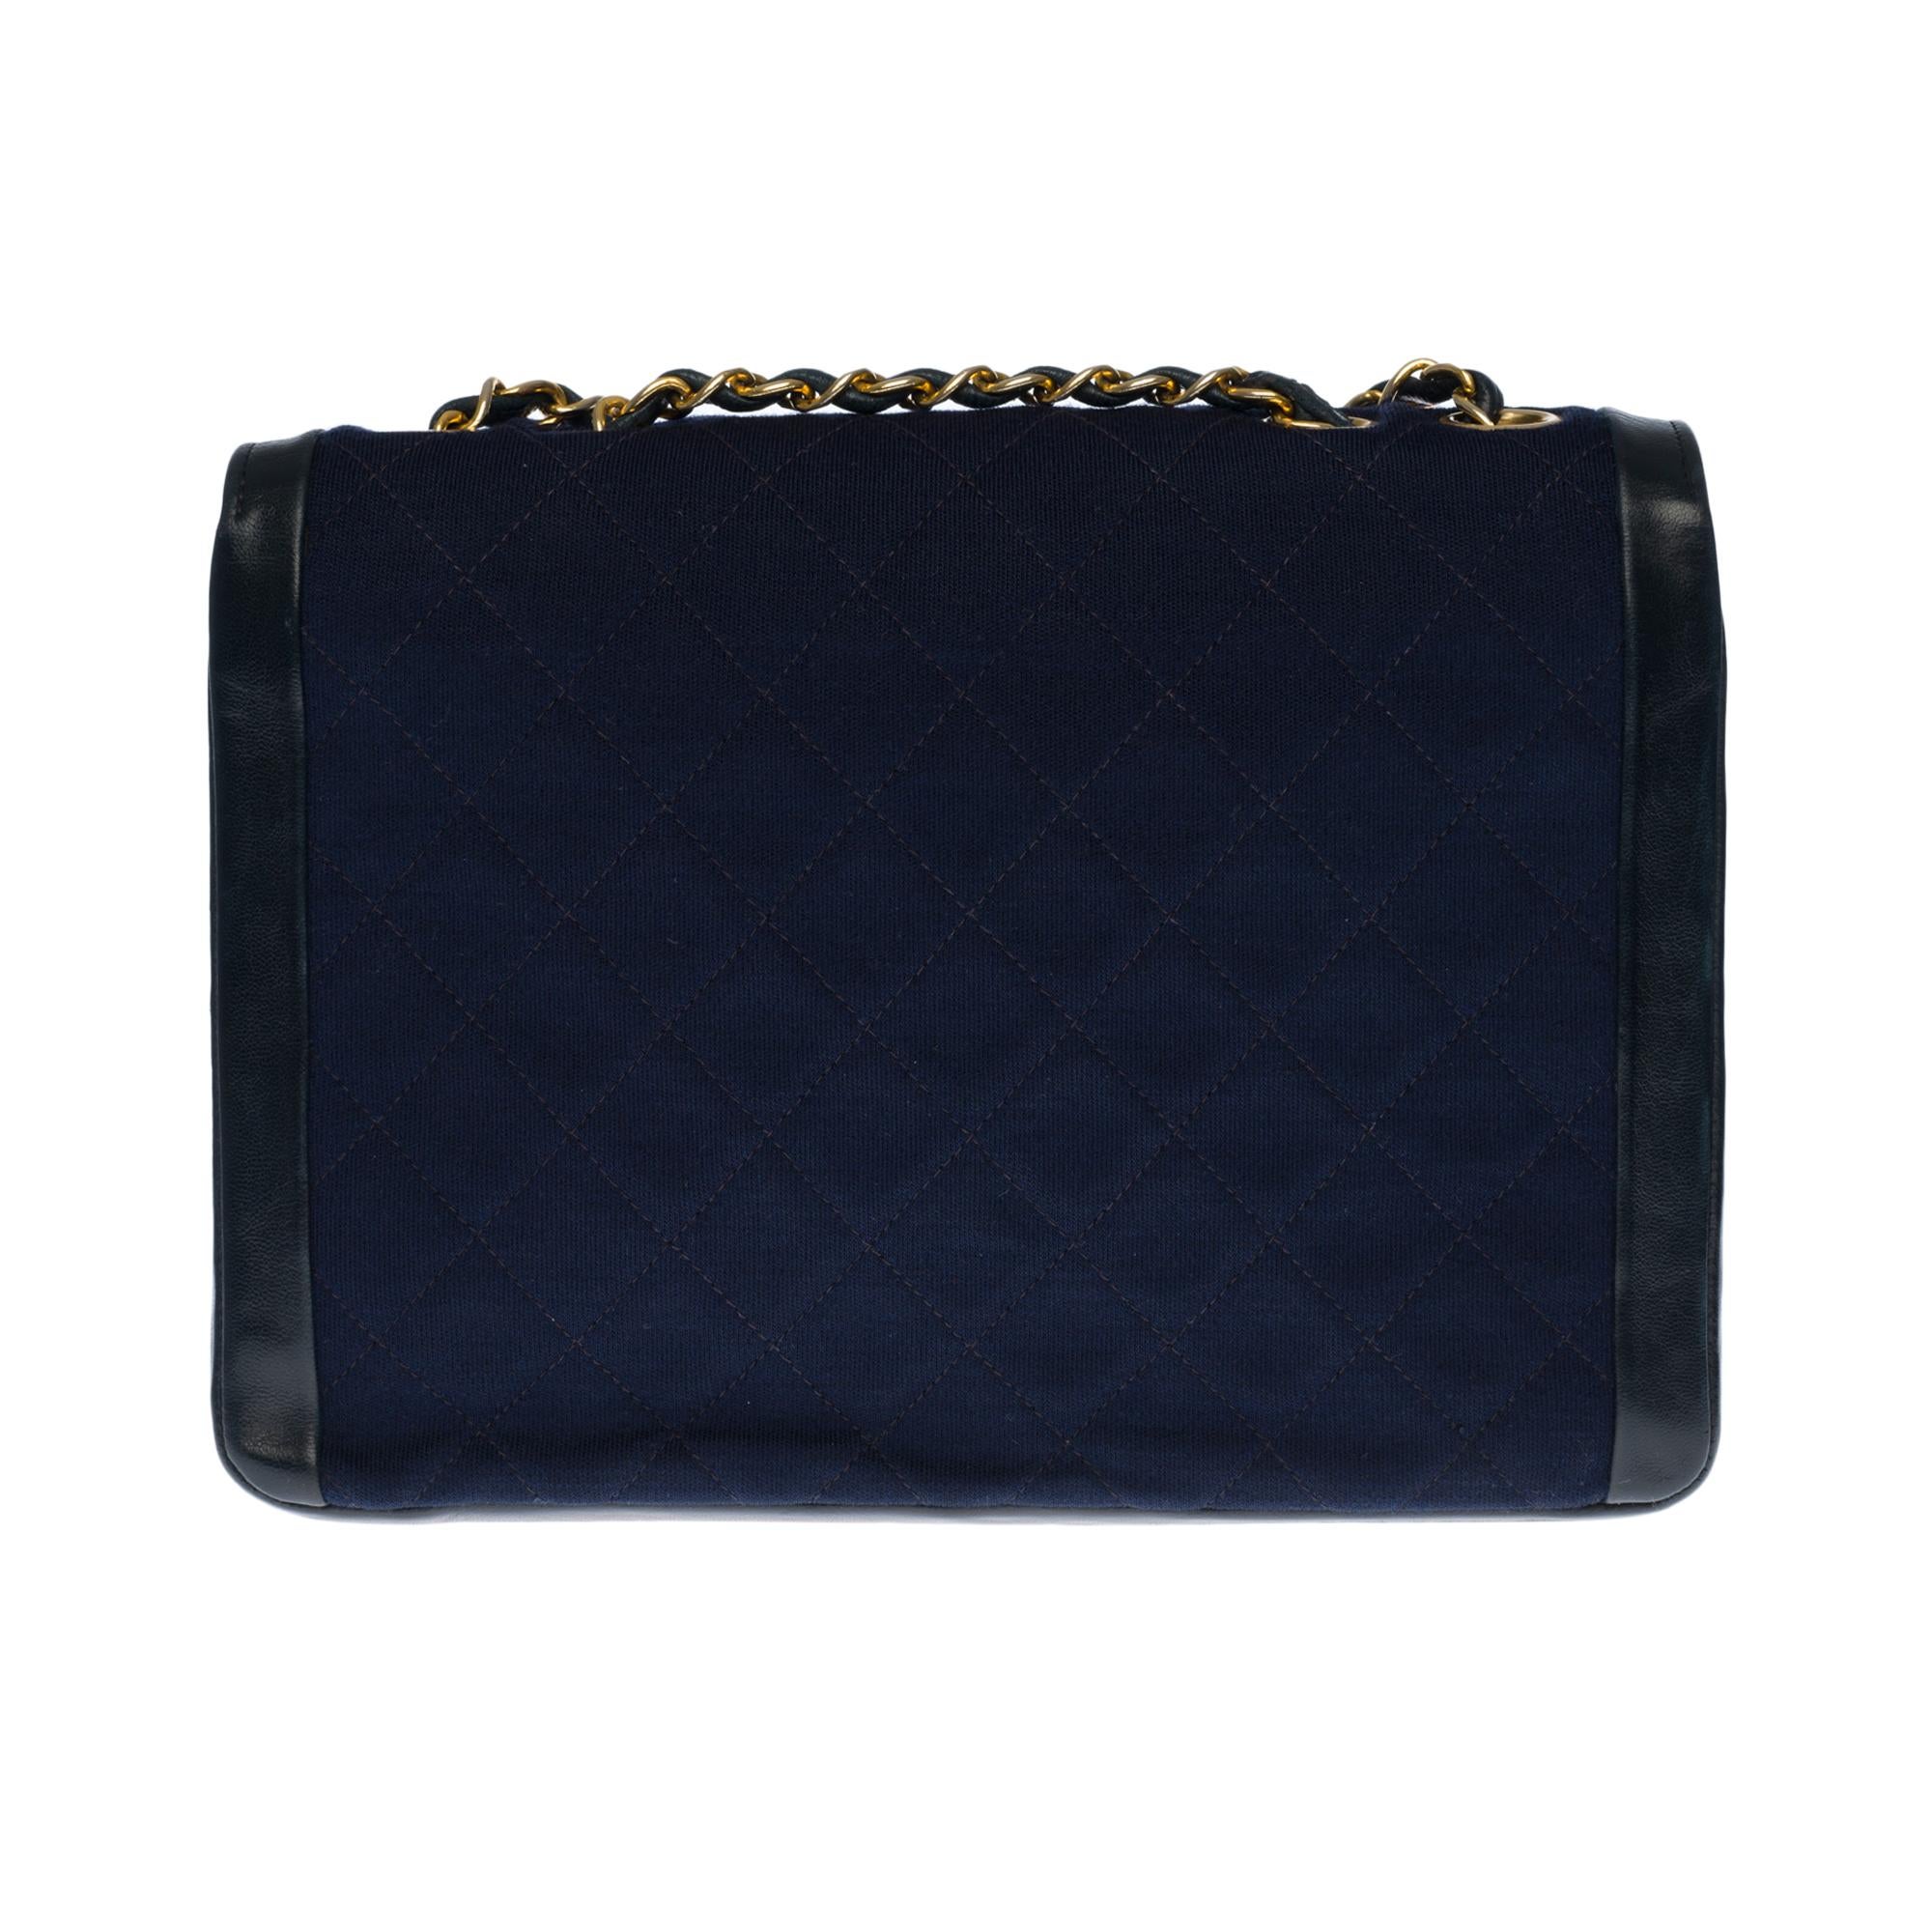 Lovely Chanel Classique two-material bag in navy blue quilted jersey and leather, gold-tone metal hardware, gold-tone metal handle intertwined with navy leather allowing a hand or shoulder support
Navy jersey quilted flap closure, gold metal CC